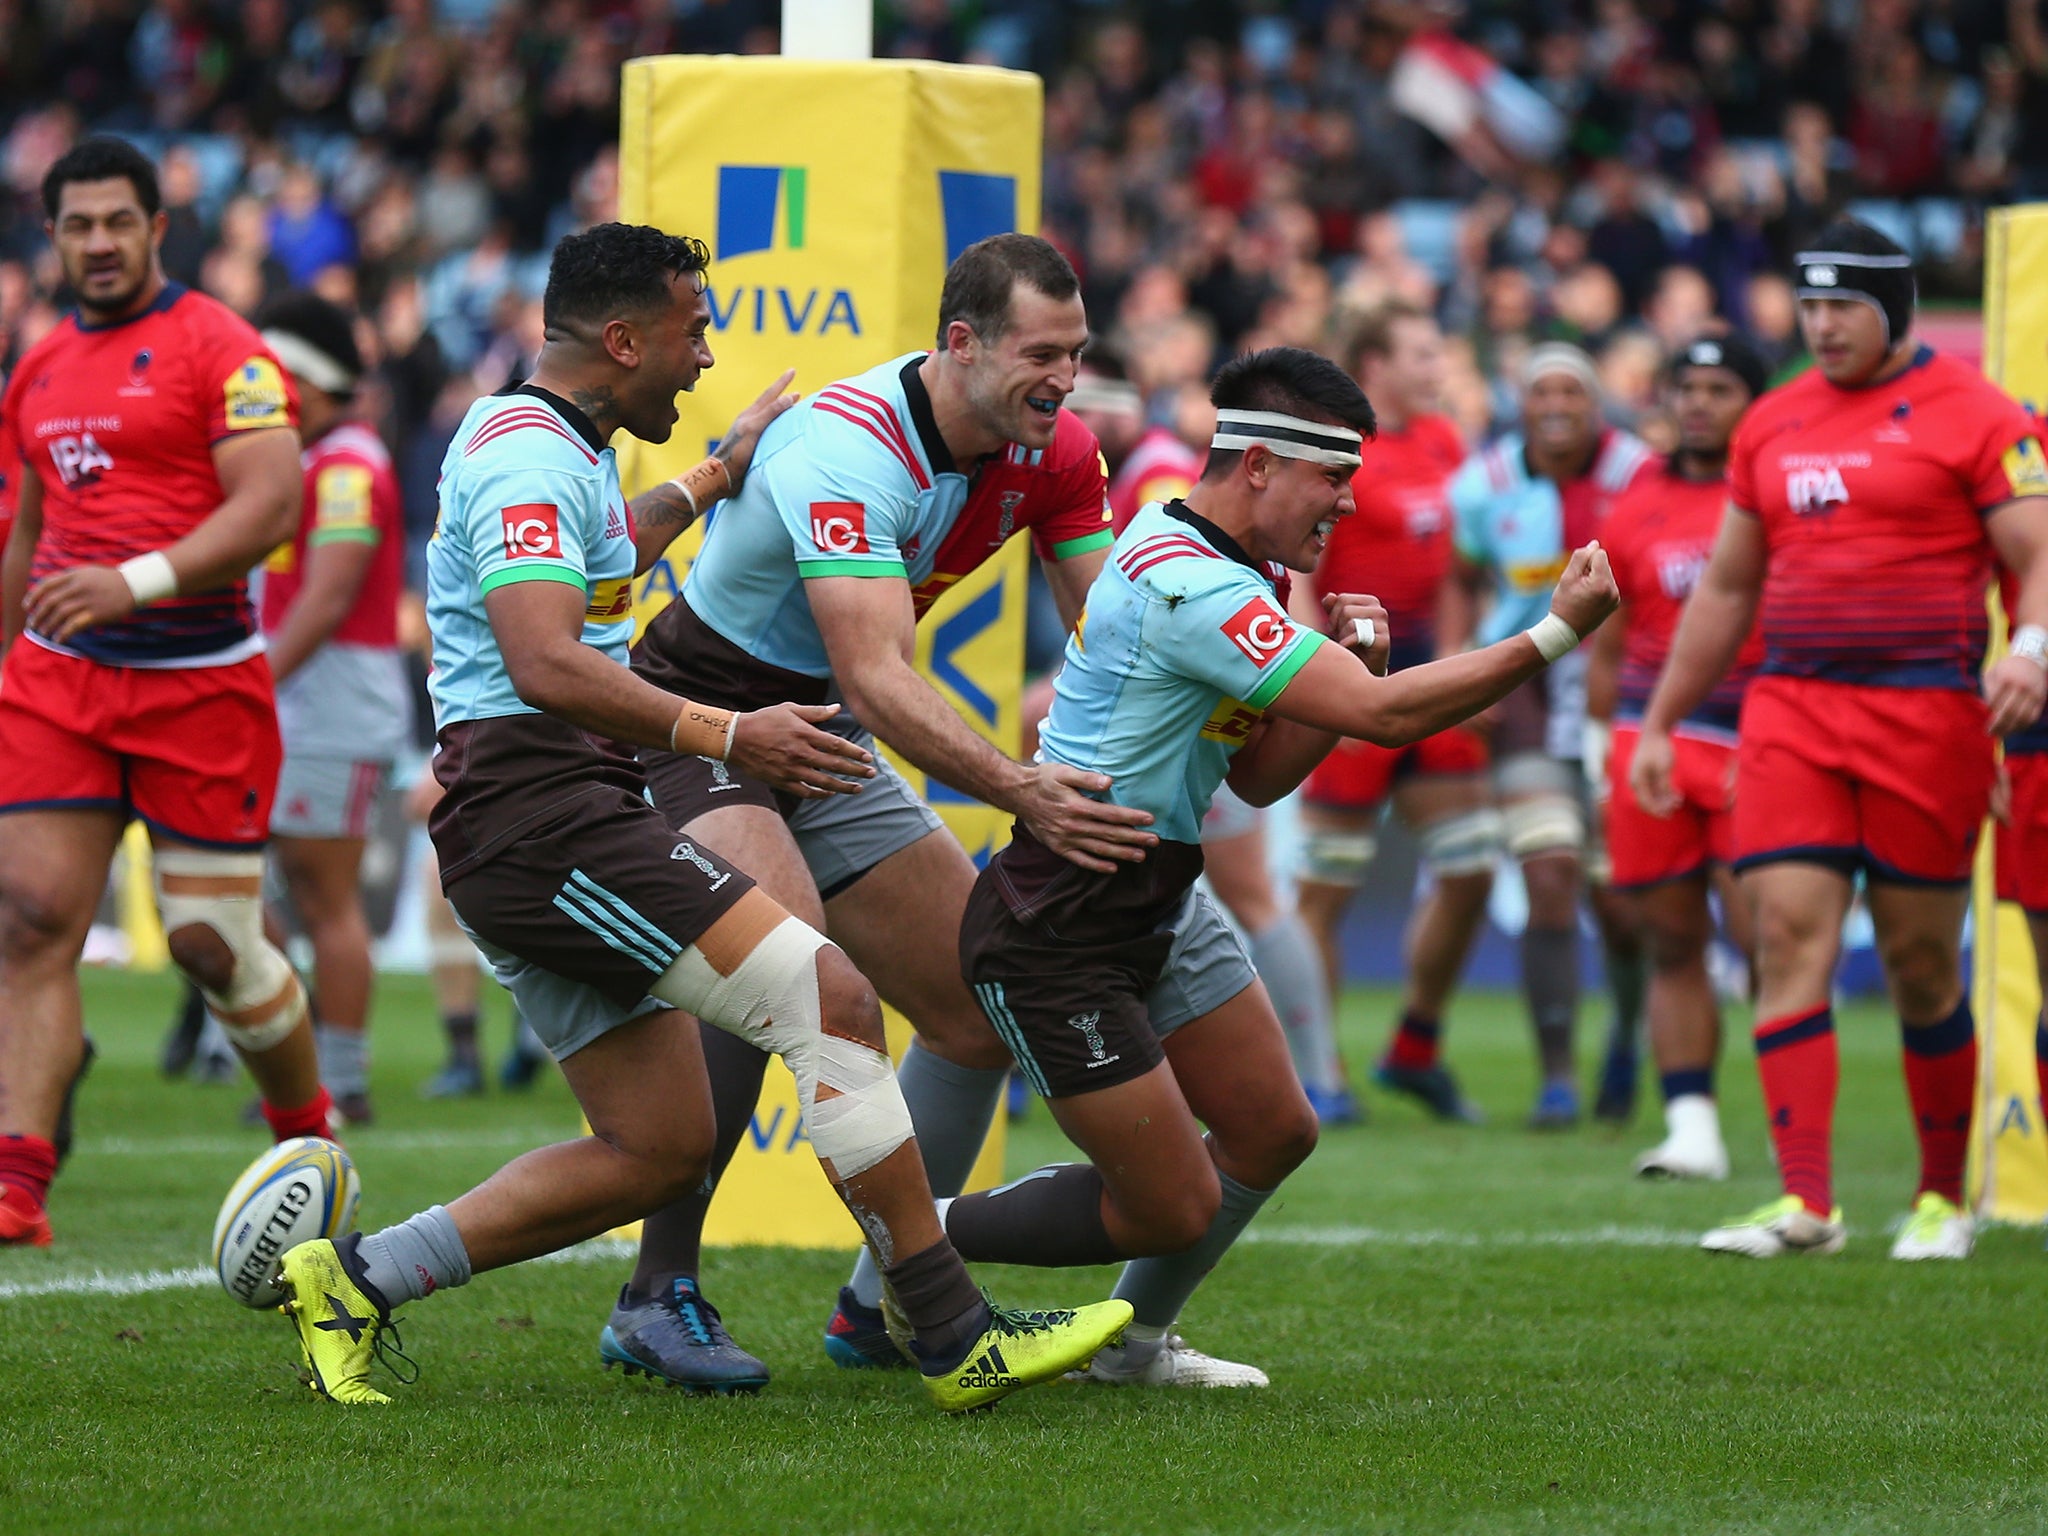 Marcus Smith scored his first Premiership try in Harlequins' 41-35 win over Worcester